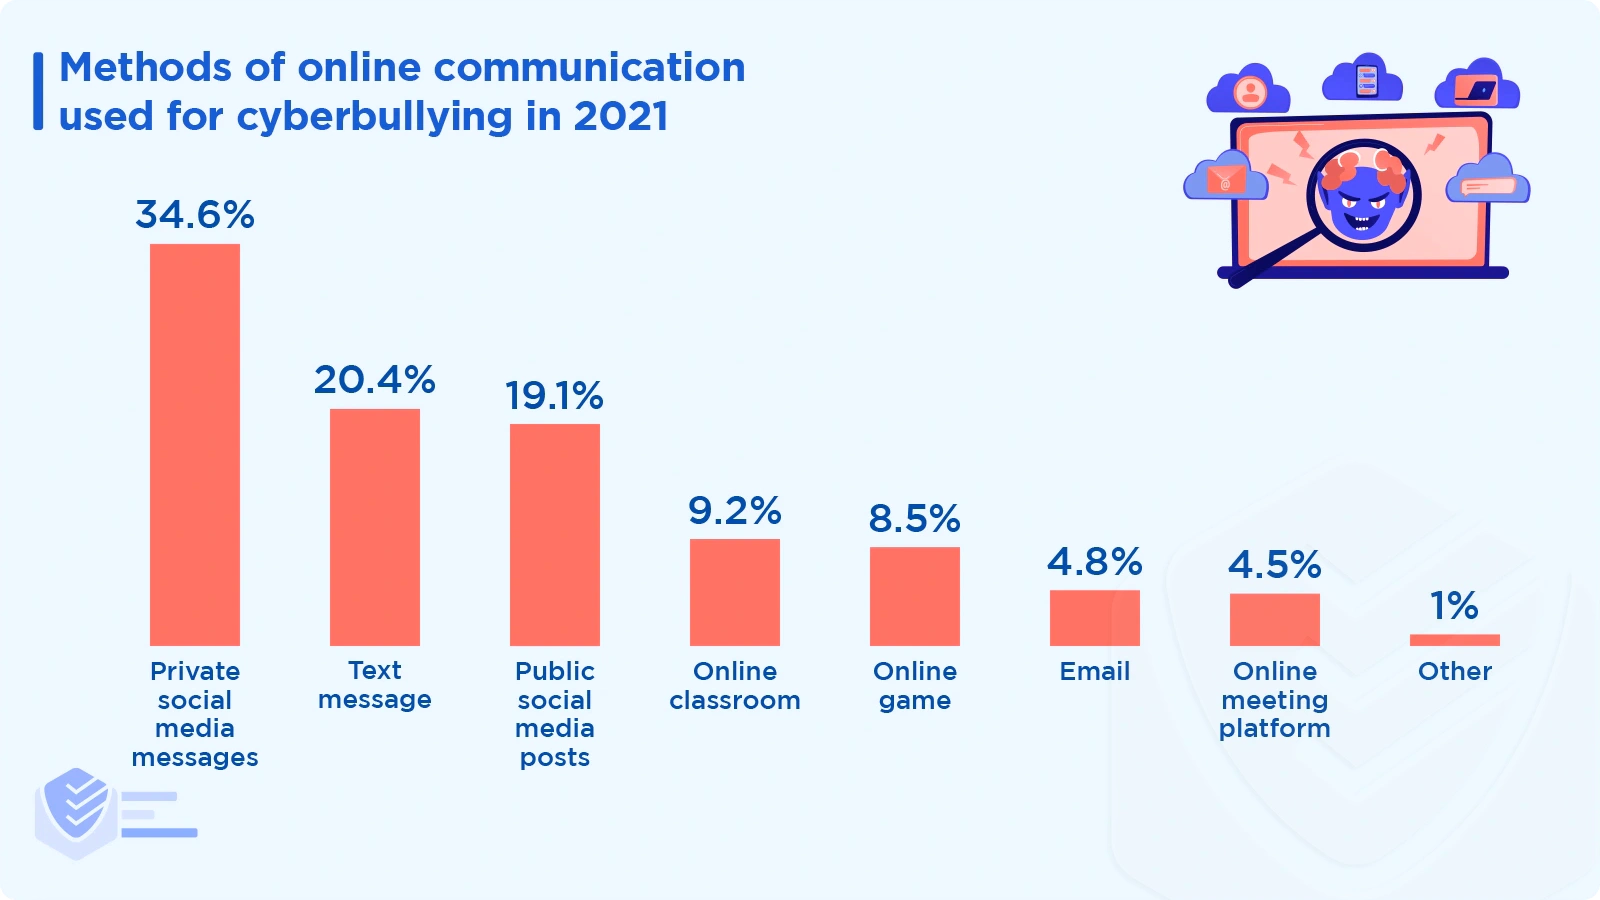 Methods of online communication used for cyberbullying in 2021